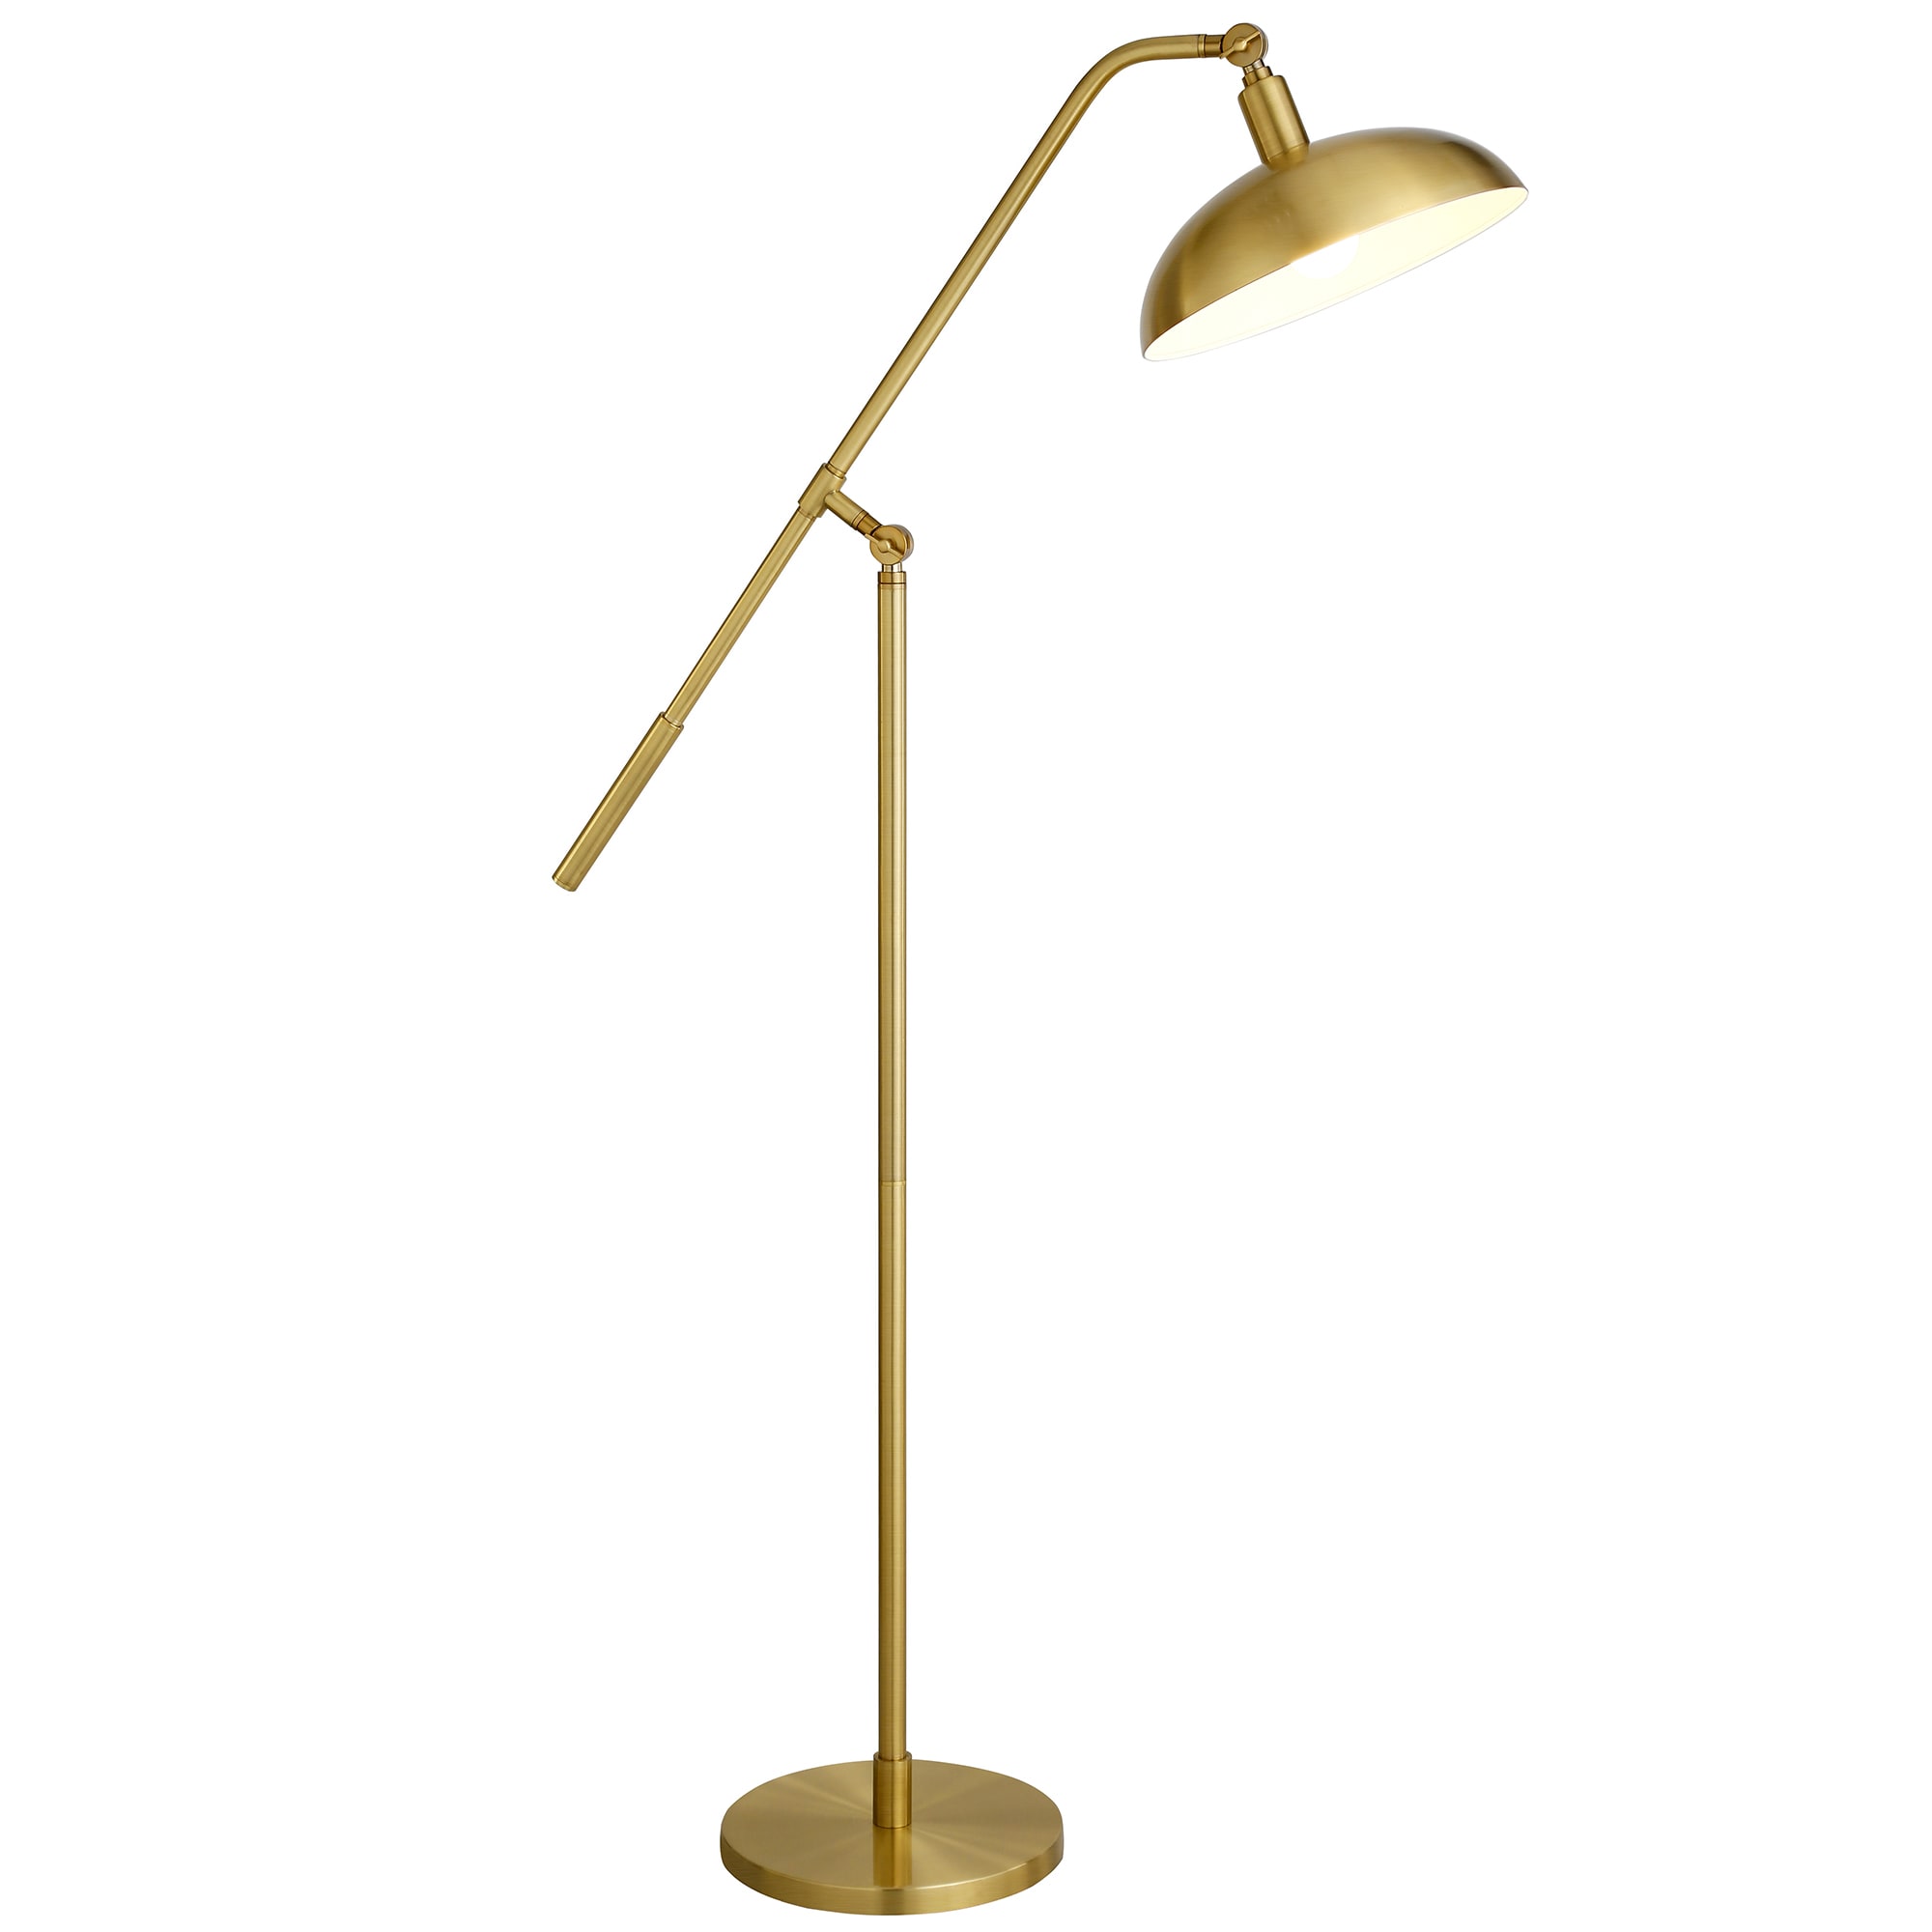 Hailey Home Devon Modern Brass Floor Lamp with Bell Shade - Contemporary  Design for Living Room, Bedroom, Office - Handcrafted Metal Base in the  Floor Lamps department at